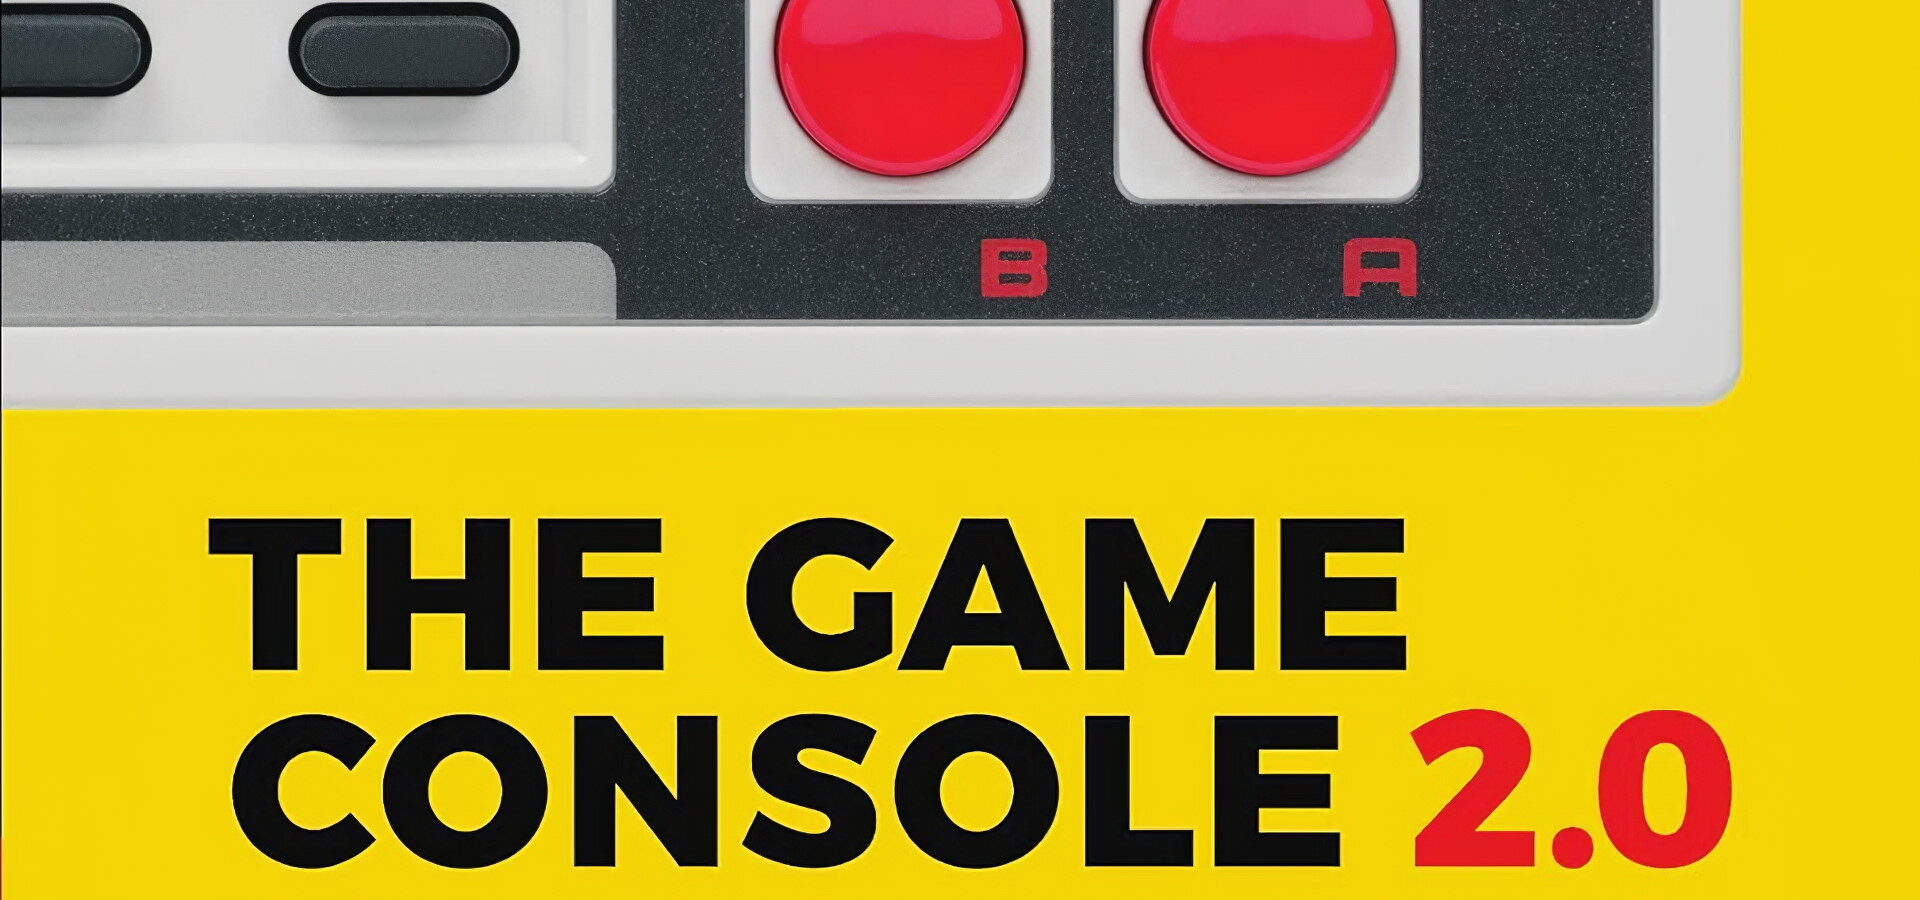 The Game Console